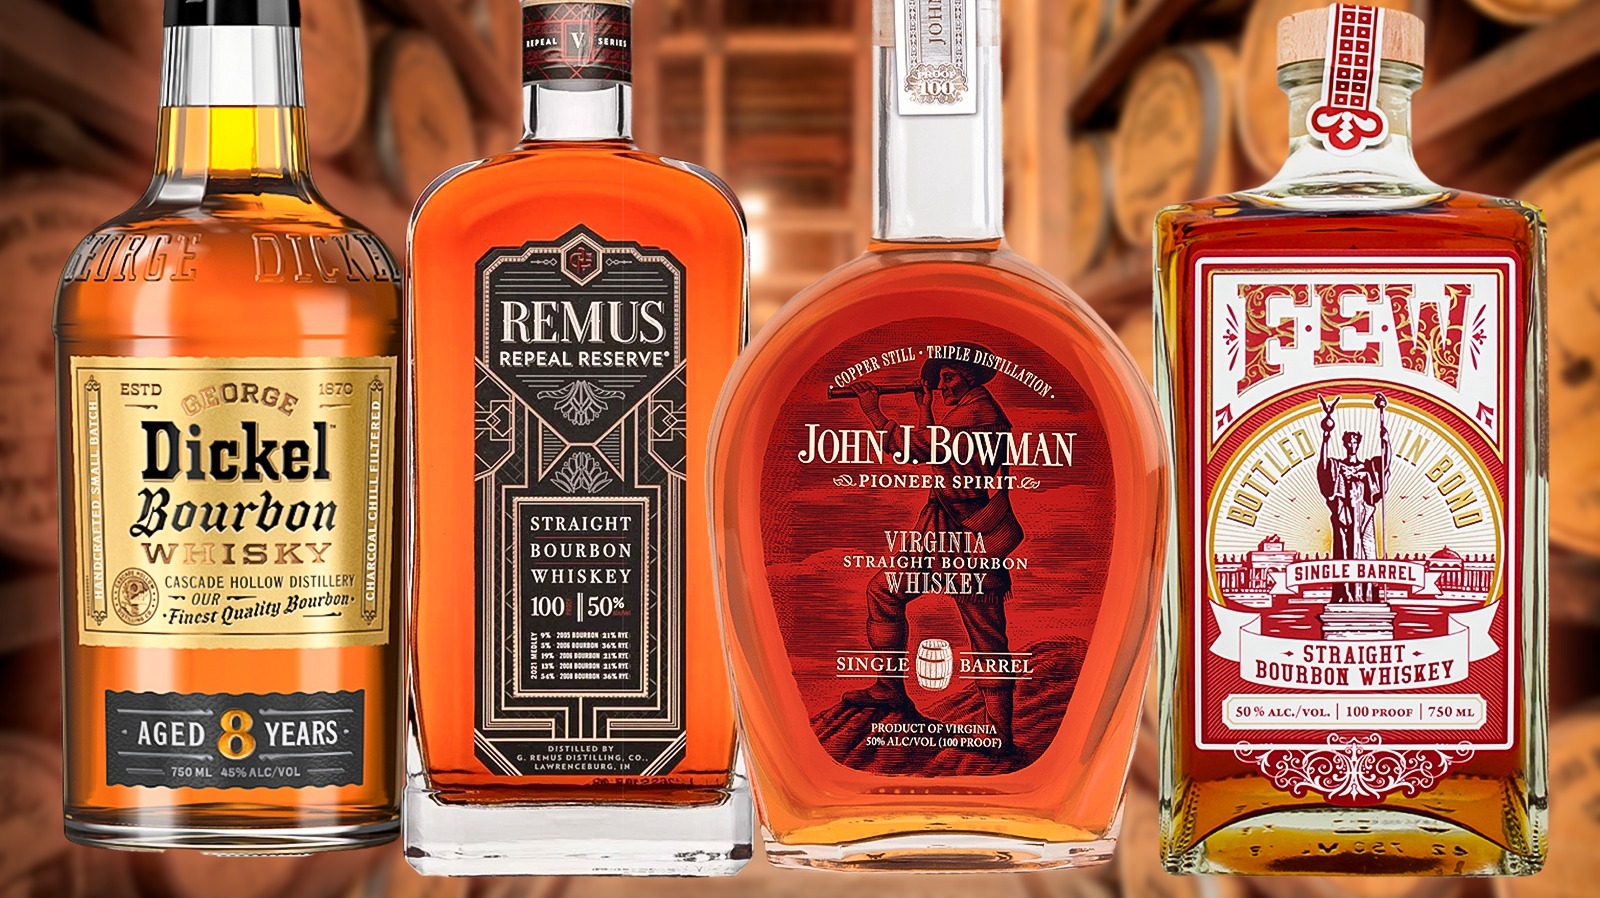 https://www.tastingtable.com/img/gallery/12-best-bourbons-that-arent-produced-in-kentucky/l-intro-1695151877.jpg